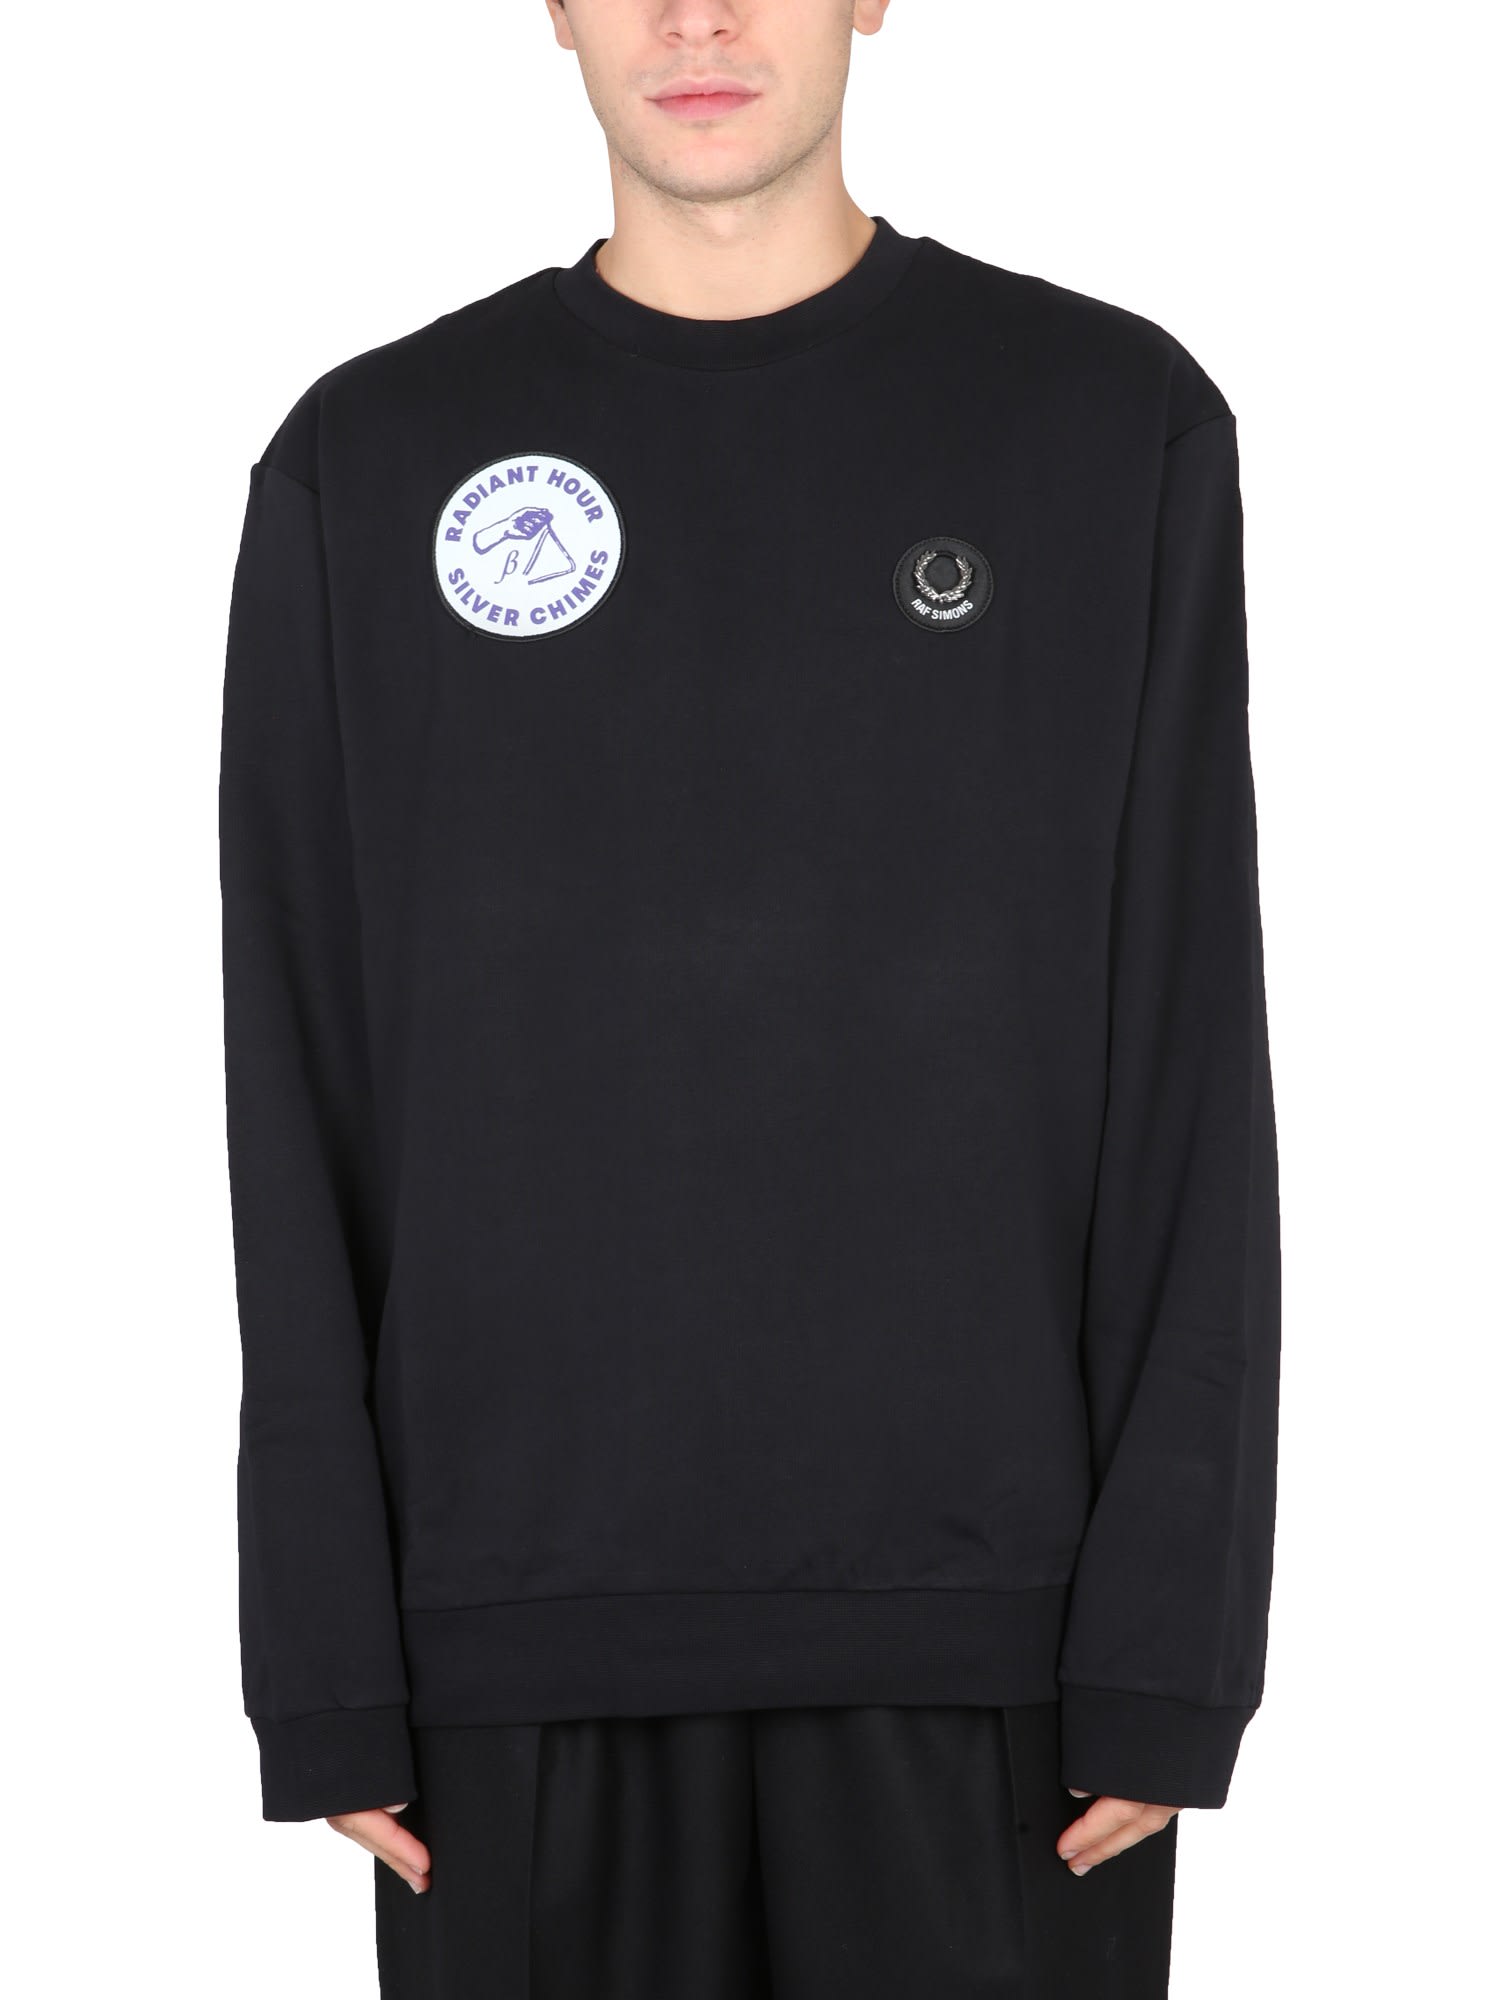 Fred Perry by Raf Simons Sweatshirt With Patch